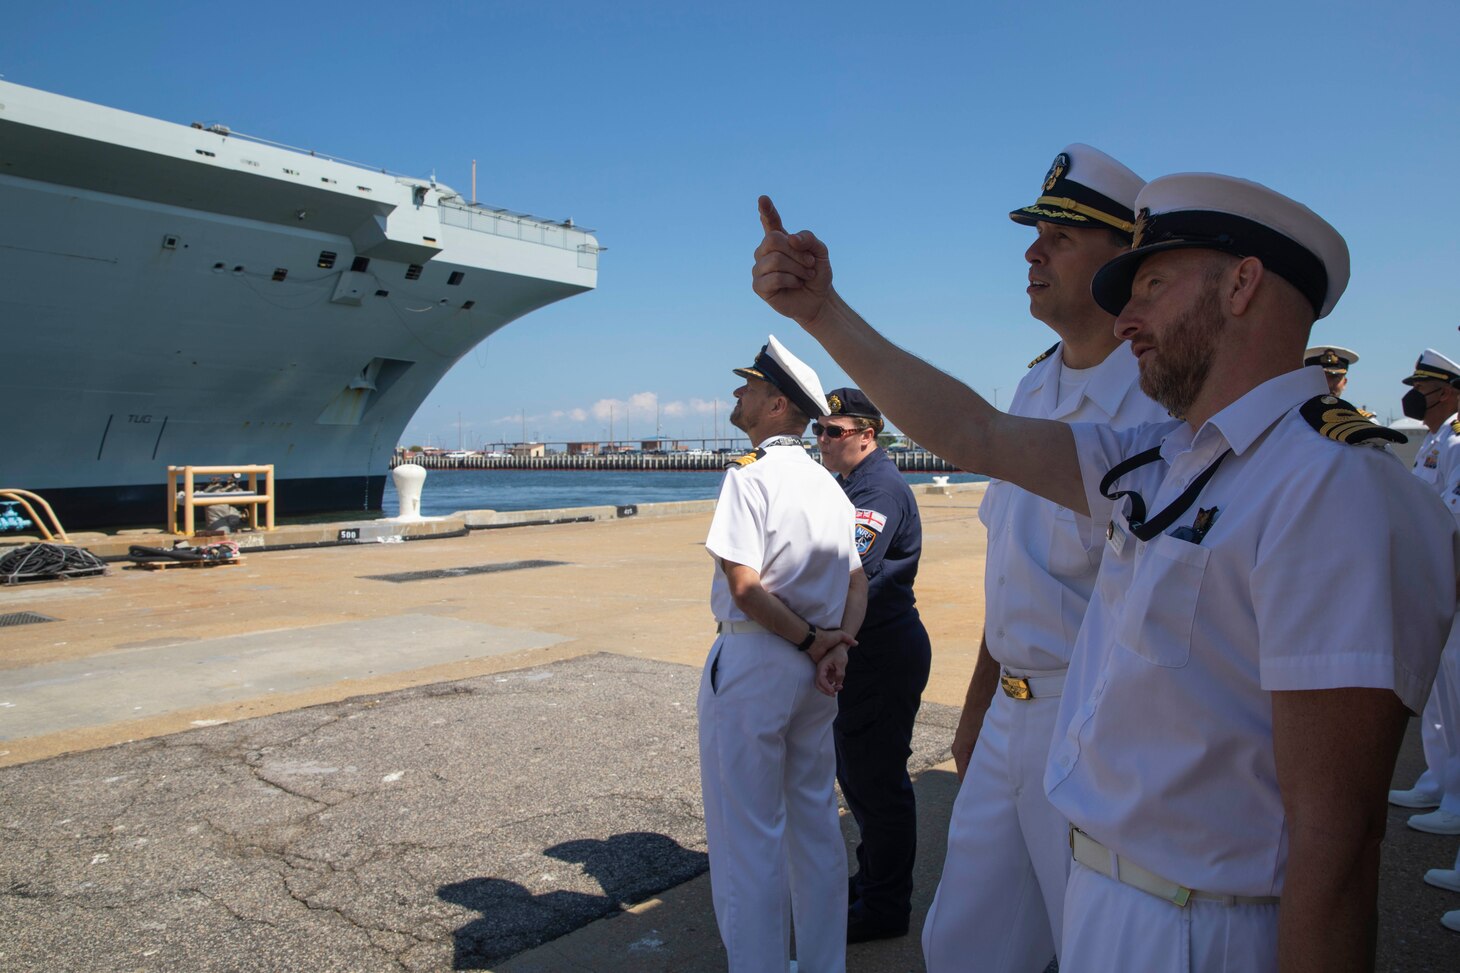 Capt. Christopher Purcell, executive officer of the amphibious assault ship USS Wasp (LHD 1) talks with Cmdr. Matt Tazewell, the staff aviation officer of the British Royal Navy aircraft carrier HMS Queen Elizabeth (RO8), on pier 12 in Naval Station Norfolk